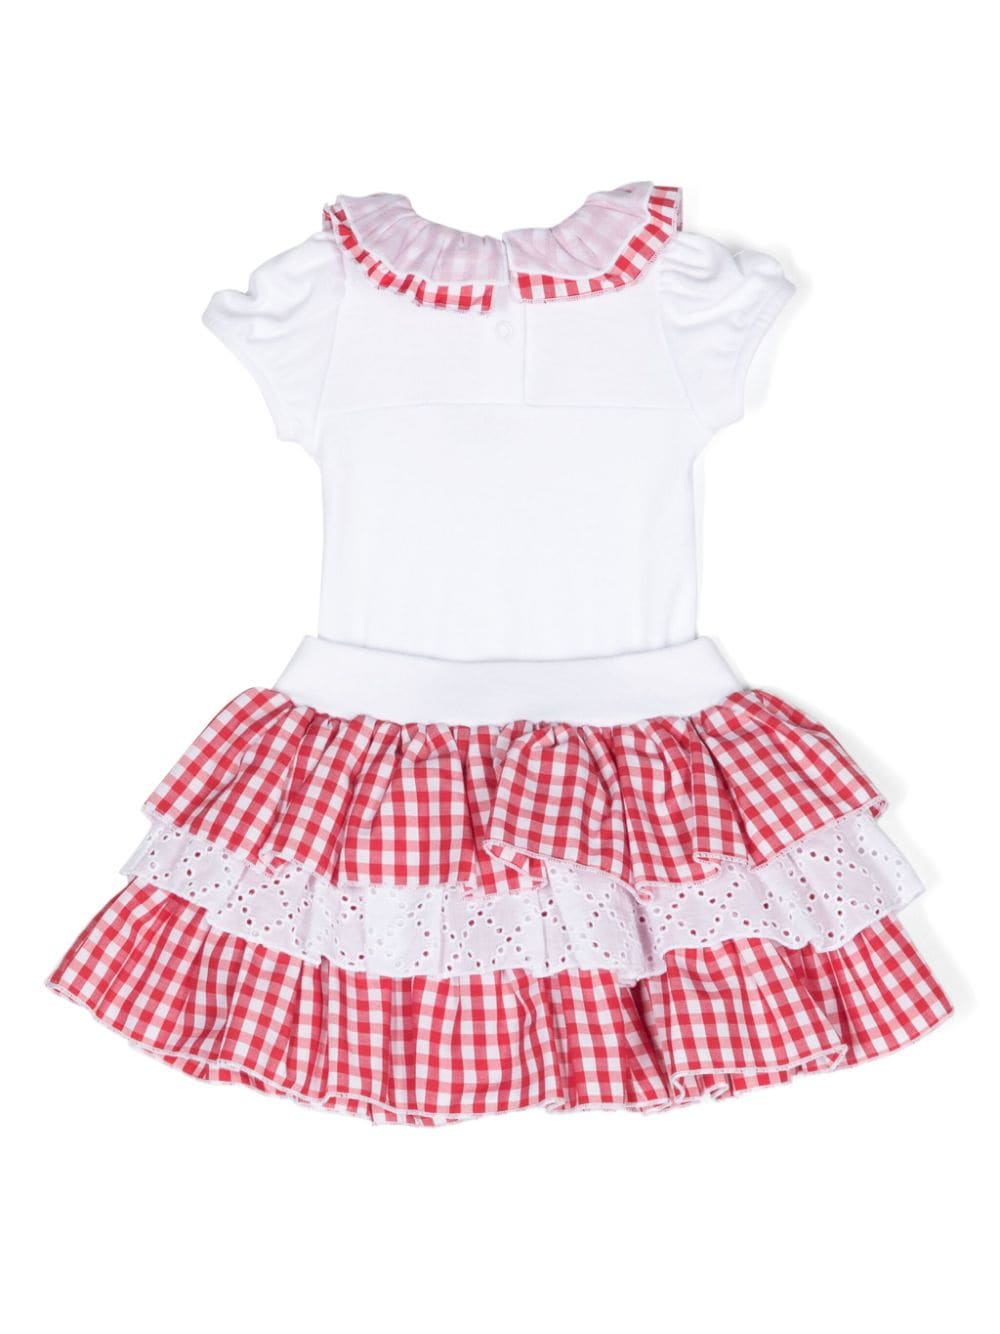 Red checked patterned baby girl outfit